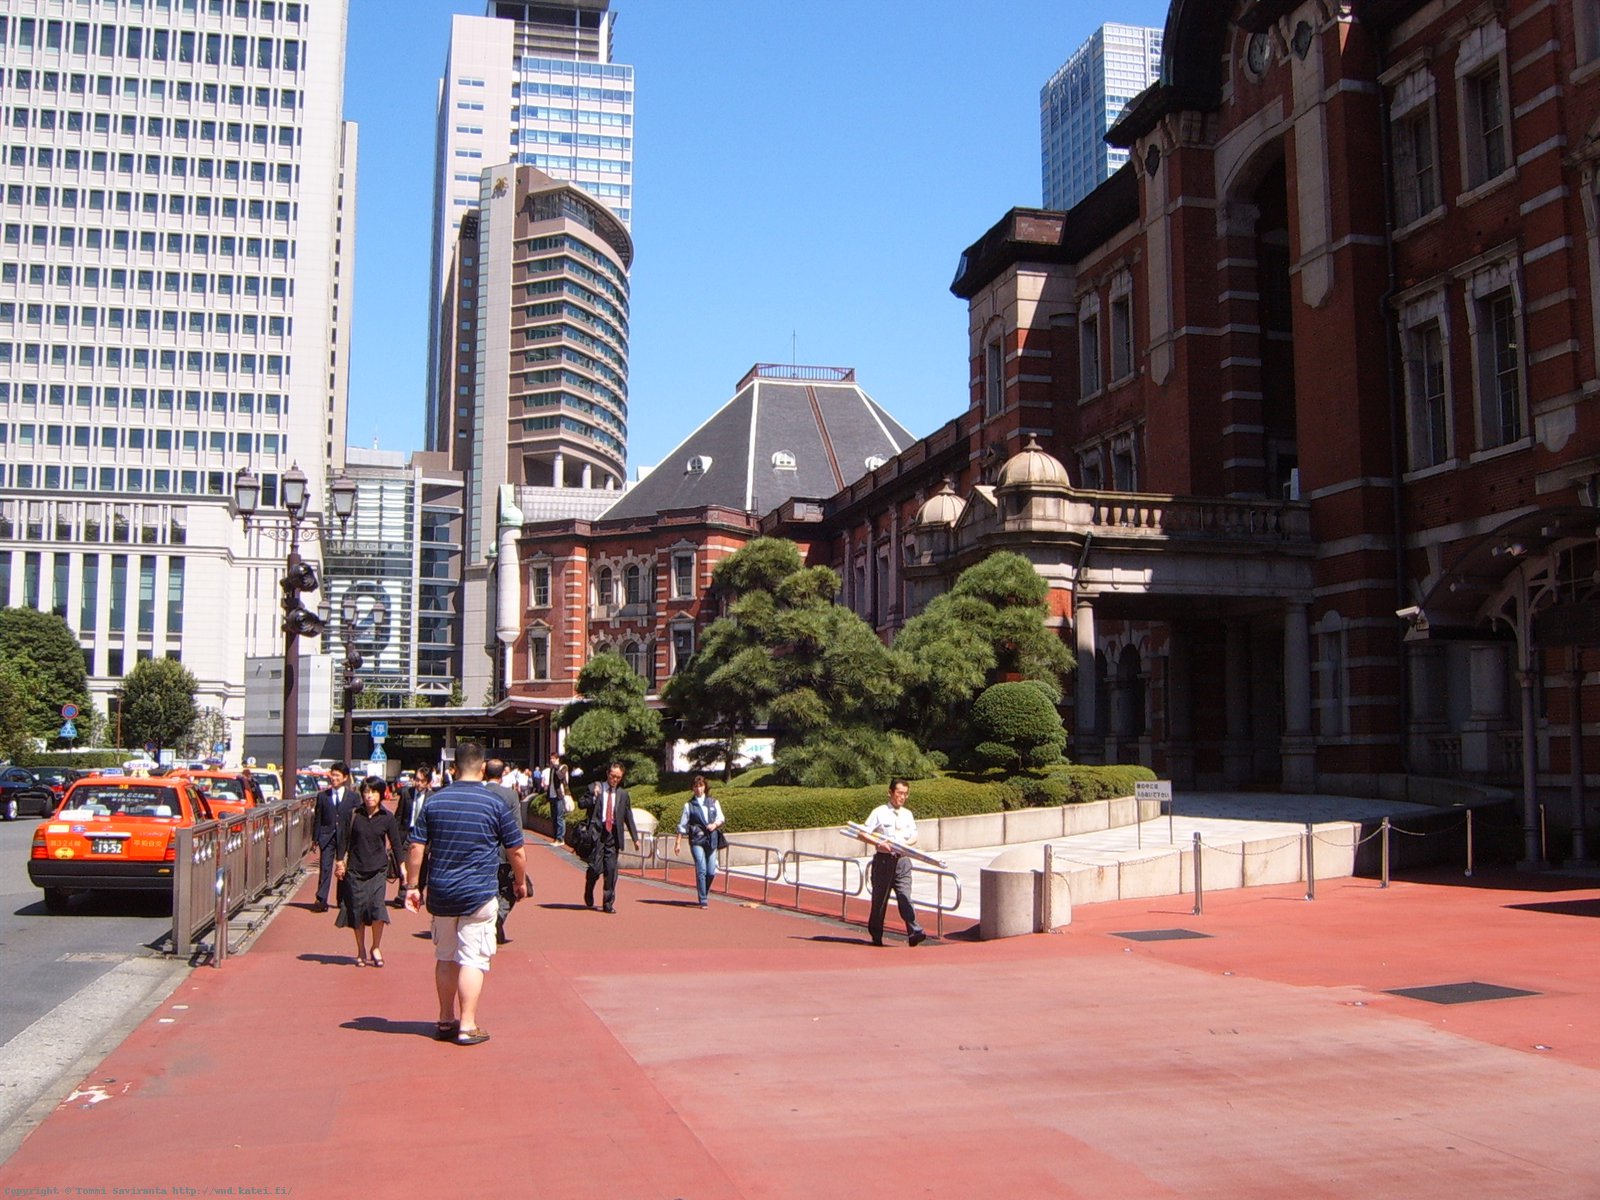 Day #4: Tokyo Station building